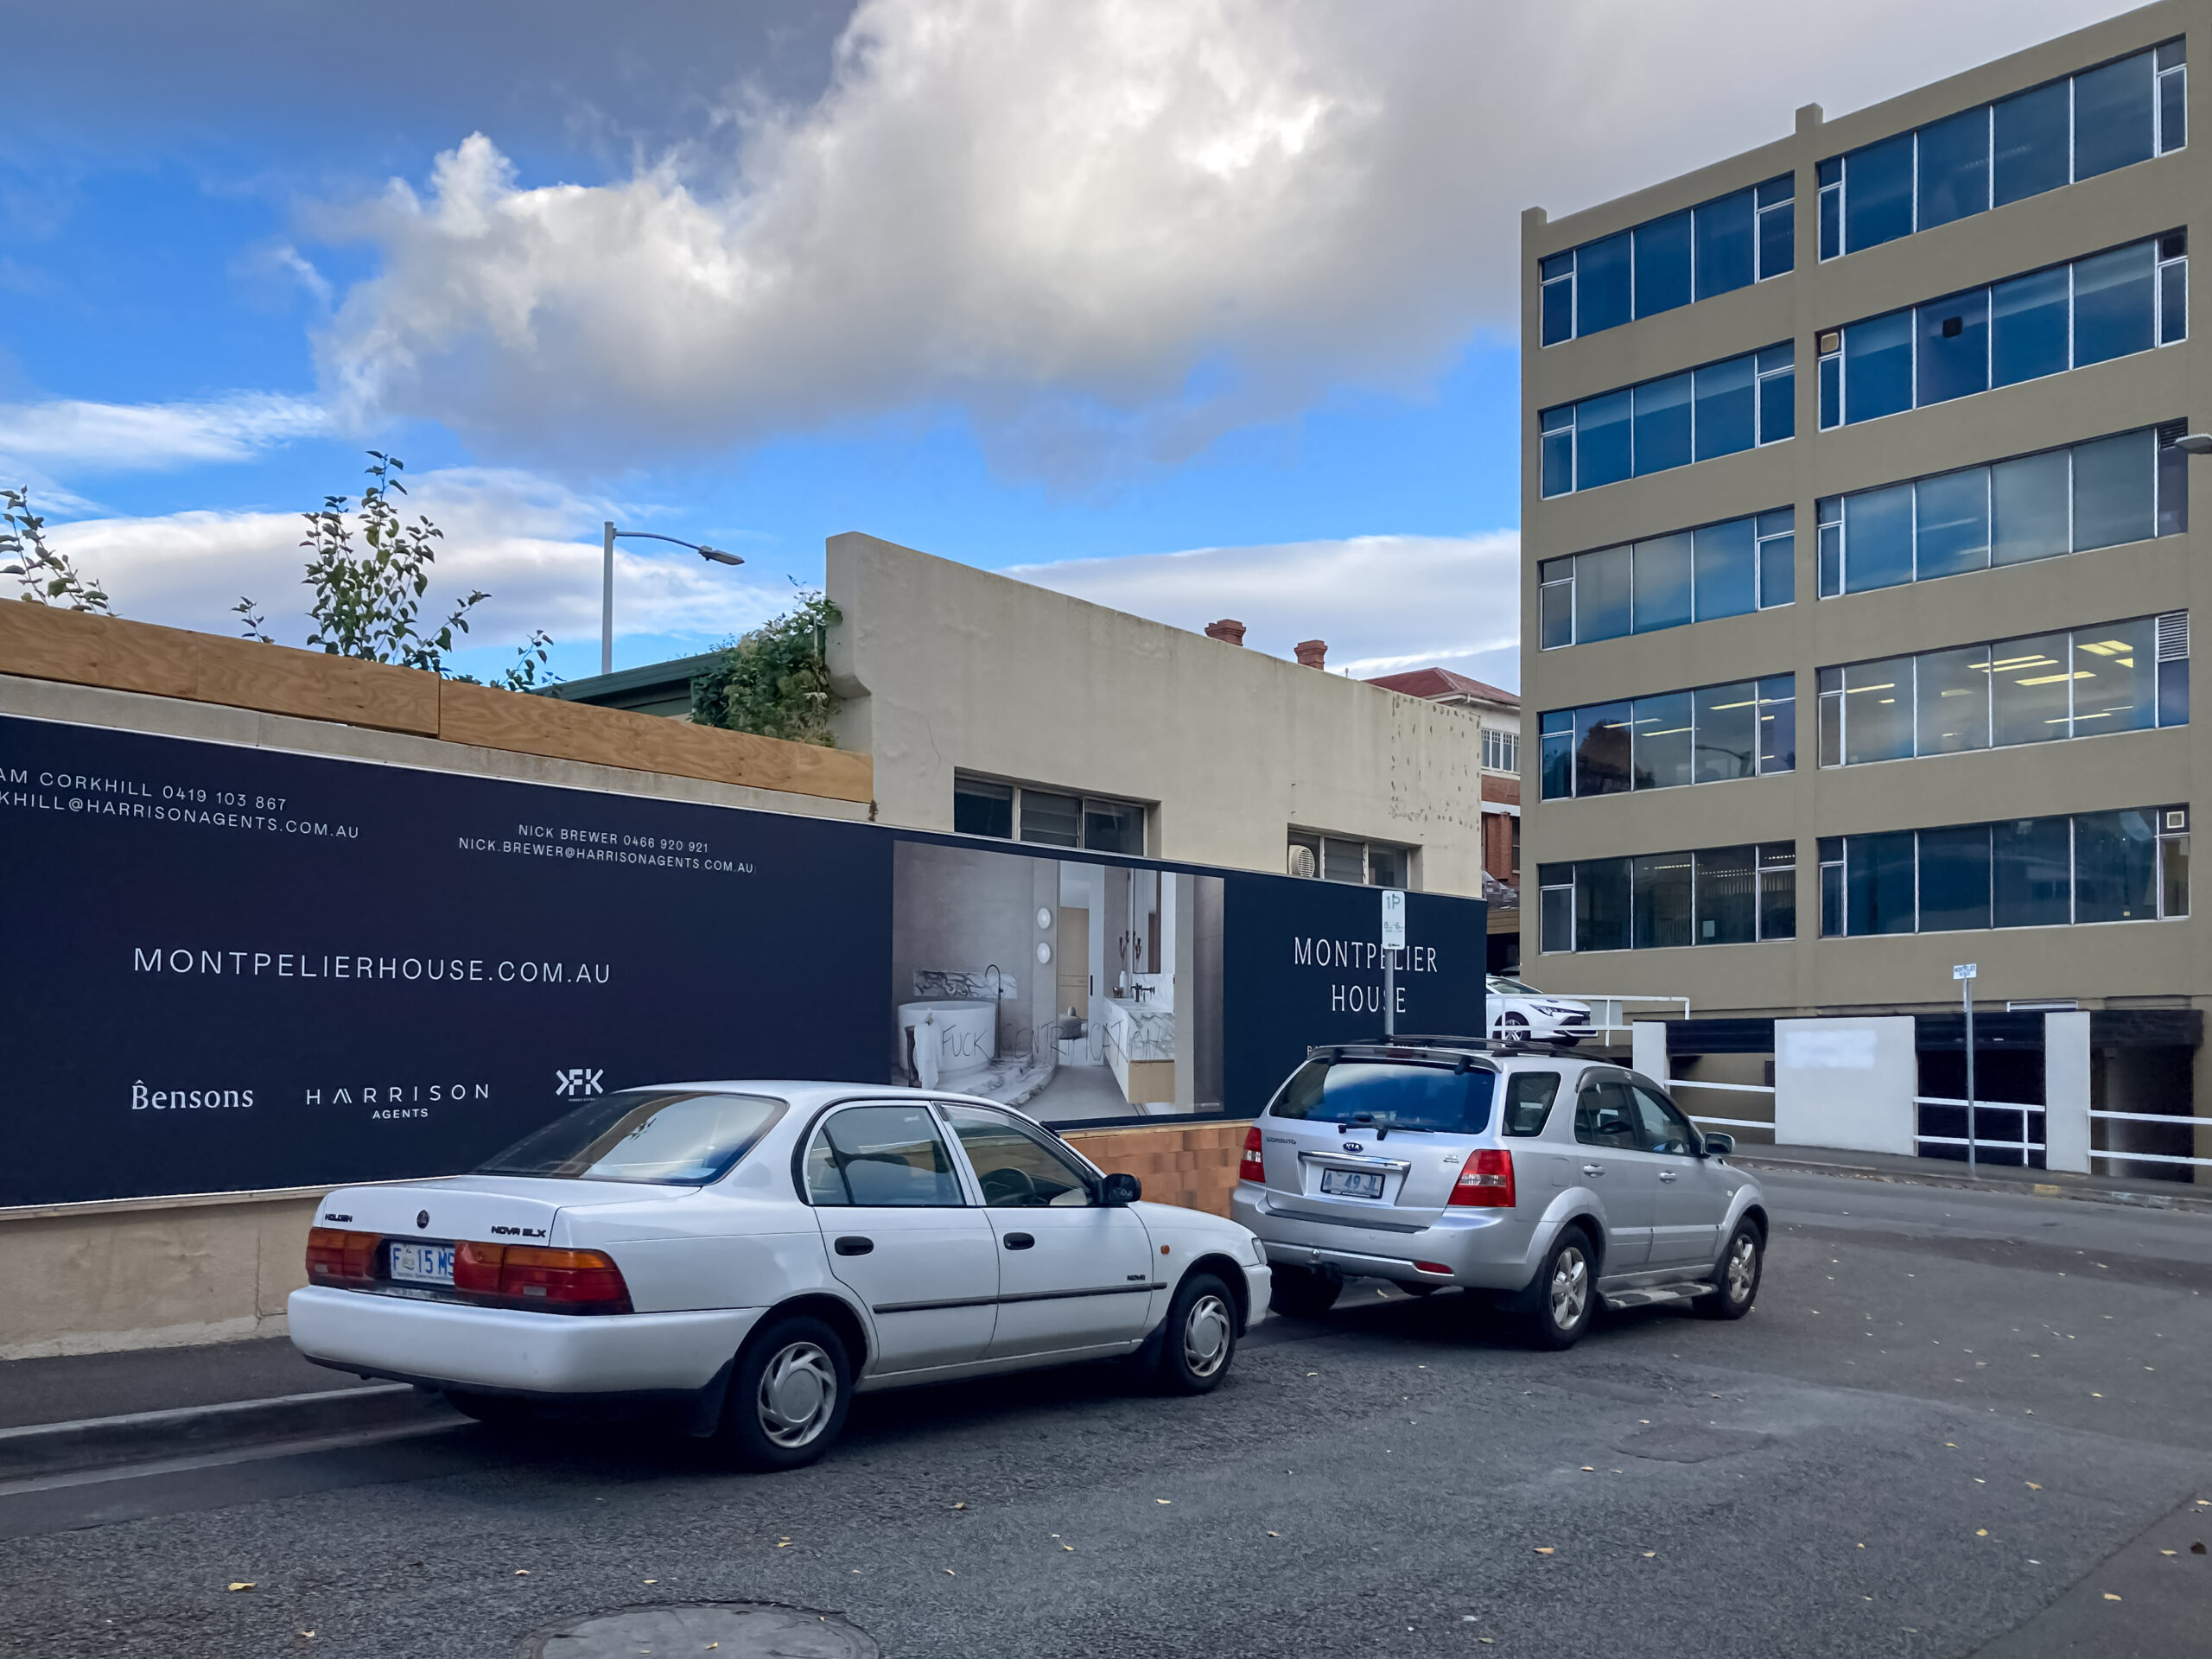 a low concrete building surrounded by advertising for a new apartment complex. Two cars are parked in front